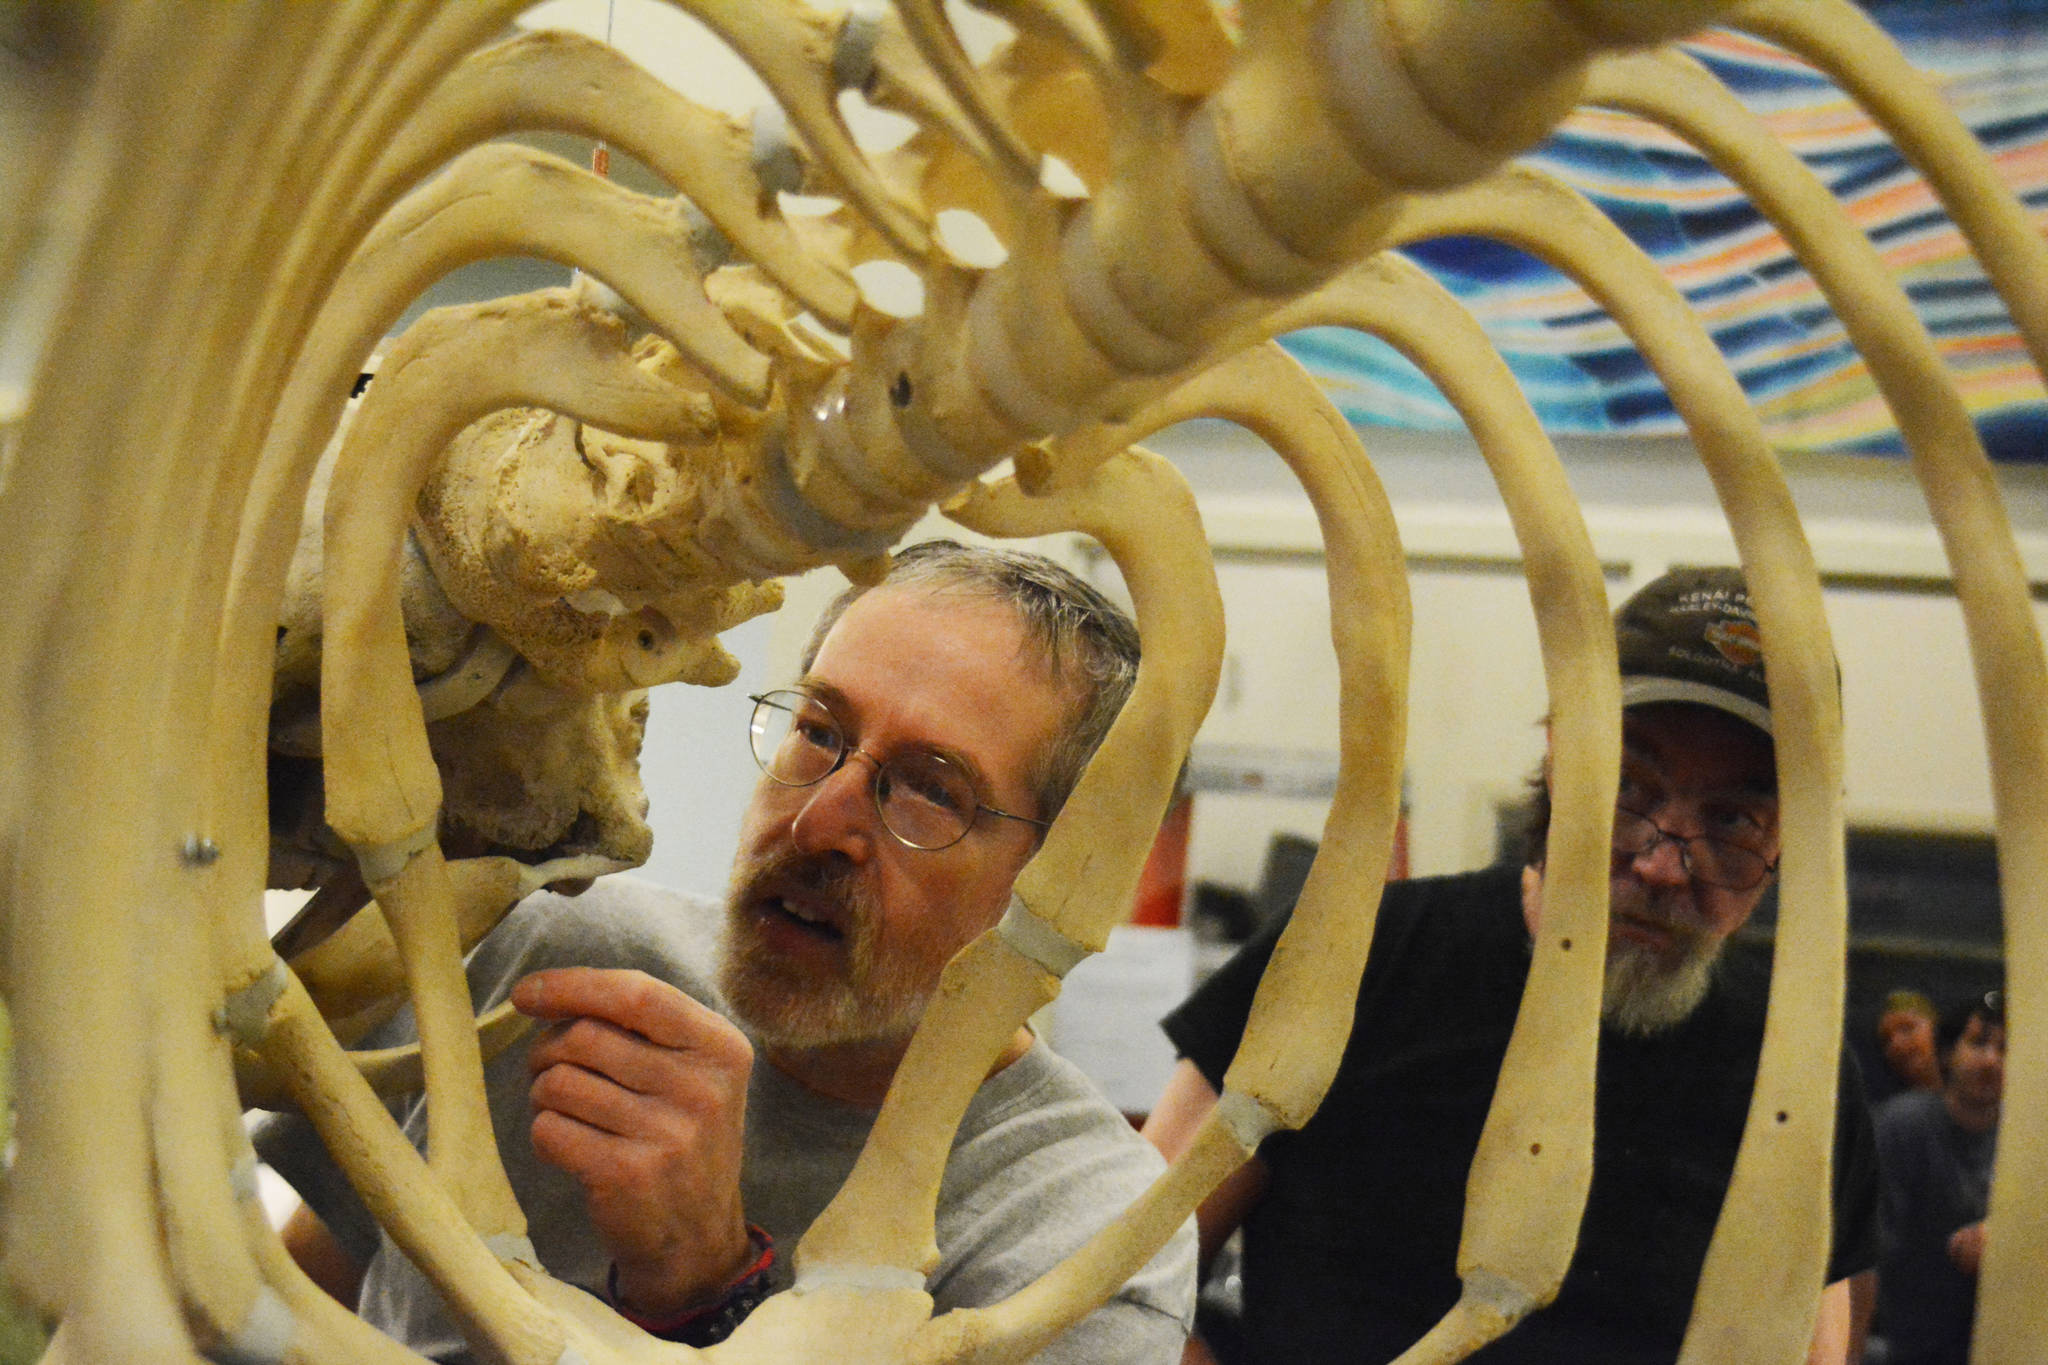 Kachemak Bay Campus instructor Lee Post makes a final adjustment to a beluga whale skeleton before it was hung on the ceiling of Bayview Hall in December 2015. Post taught a class on whale articulation this semester, and students prepared and put together the skeleton. It’s the second whale at KBC. (Photo by Michael Armstrong/Homer News)